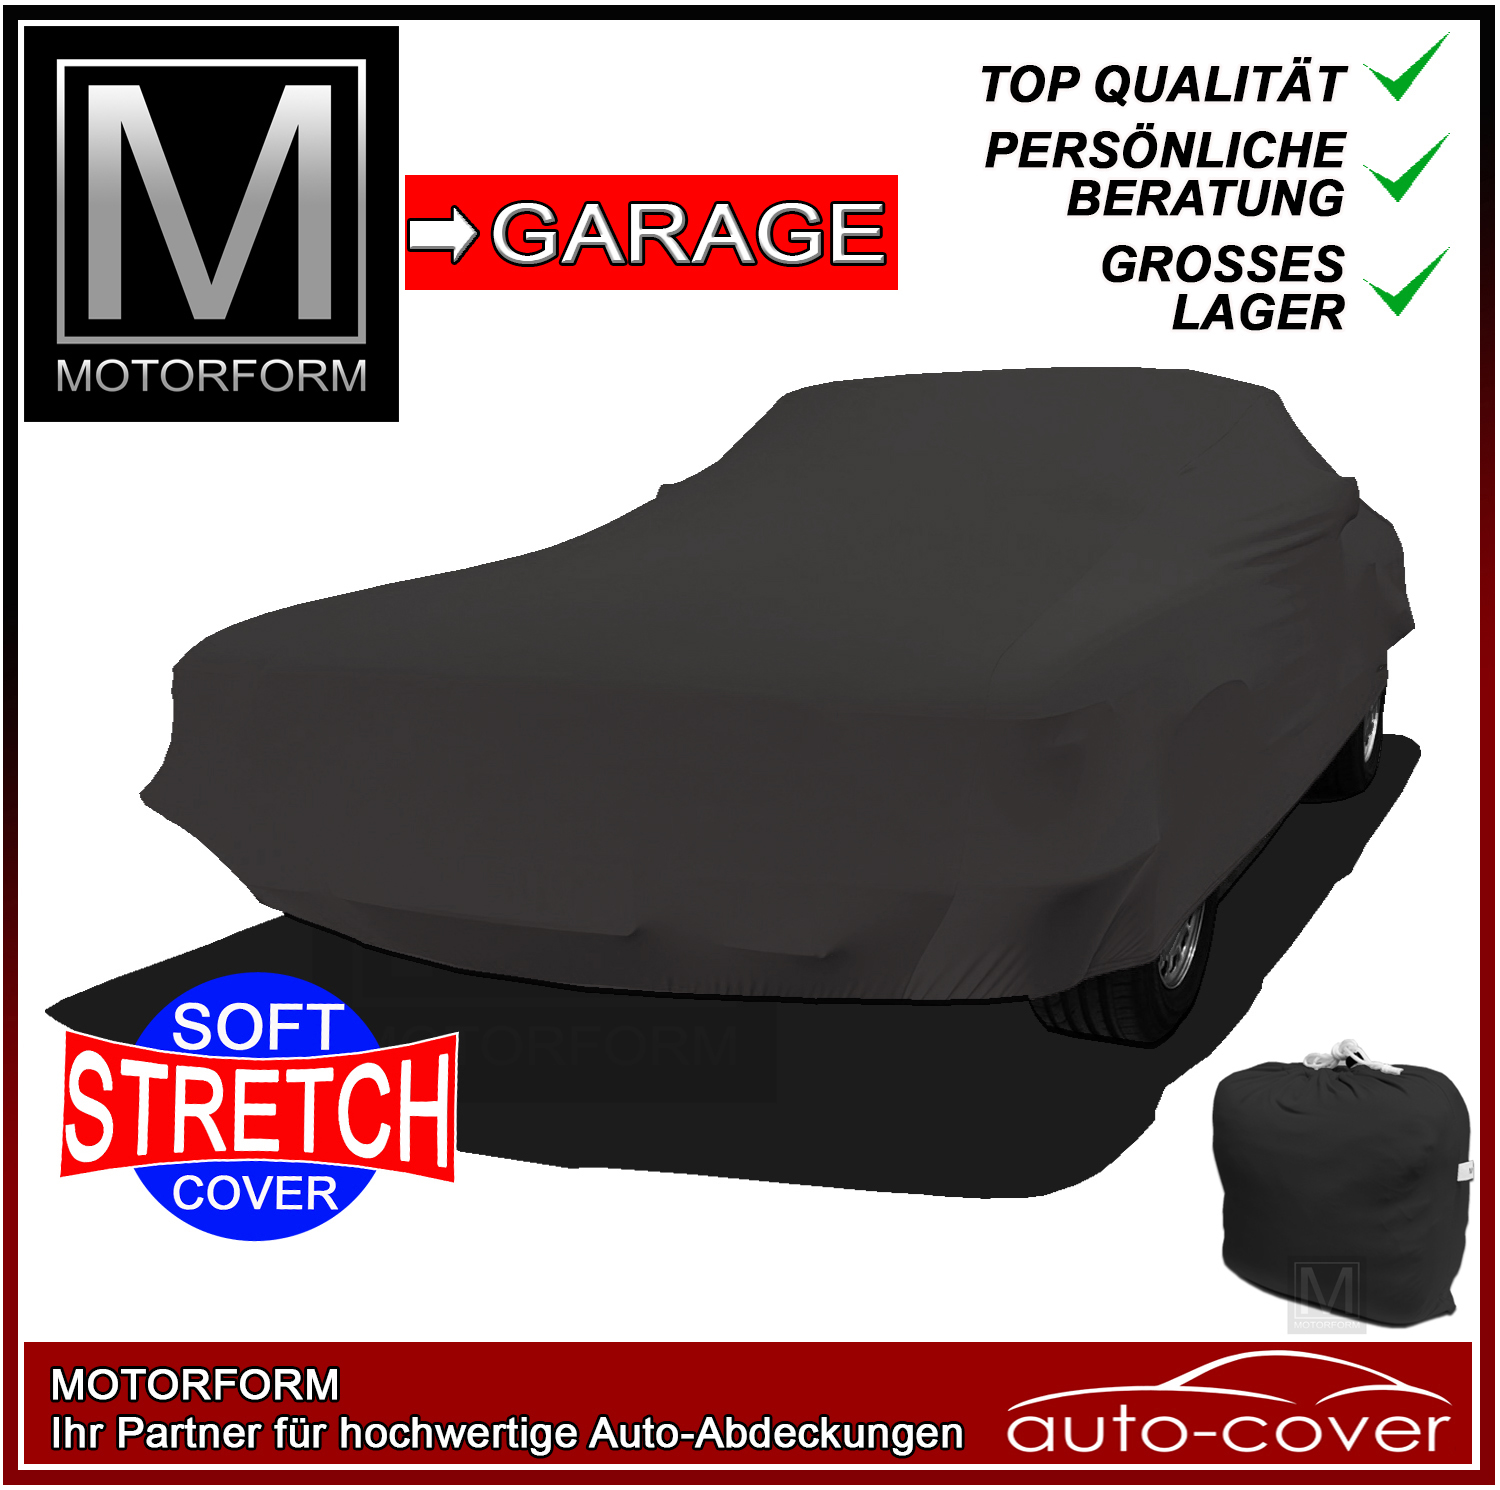 Super Stretchy Cover for Hyundai Veloster Series 1 (2011-18)